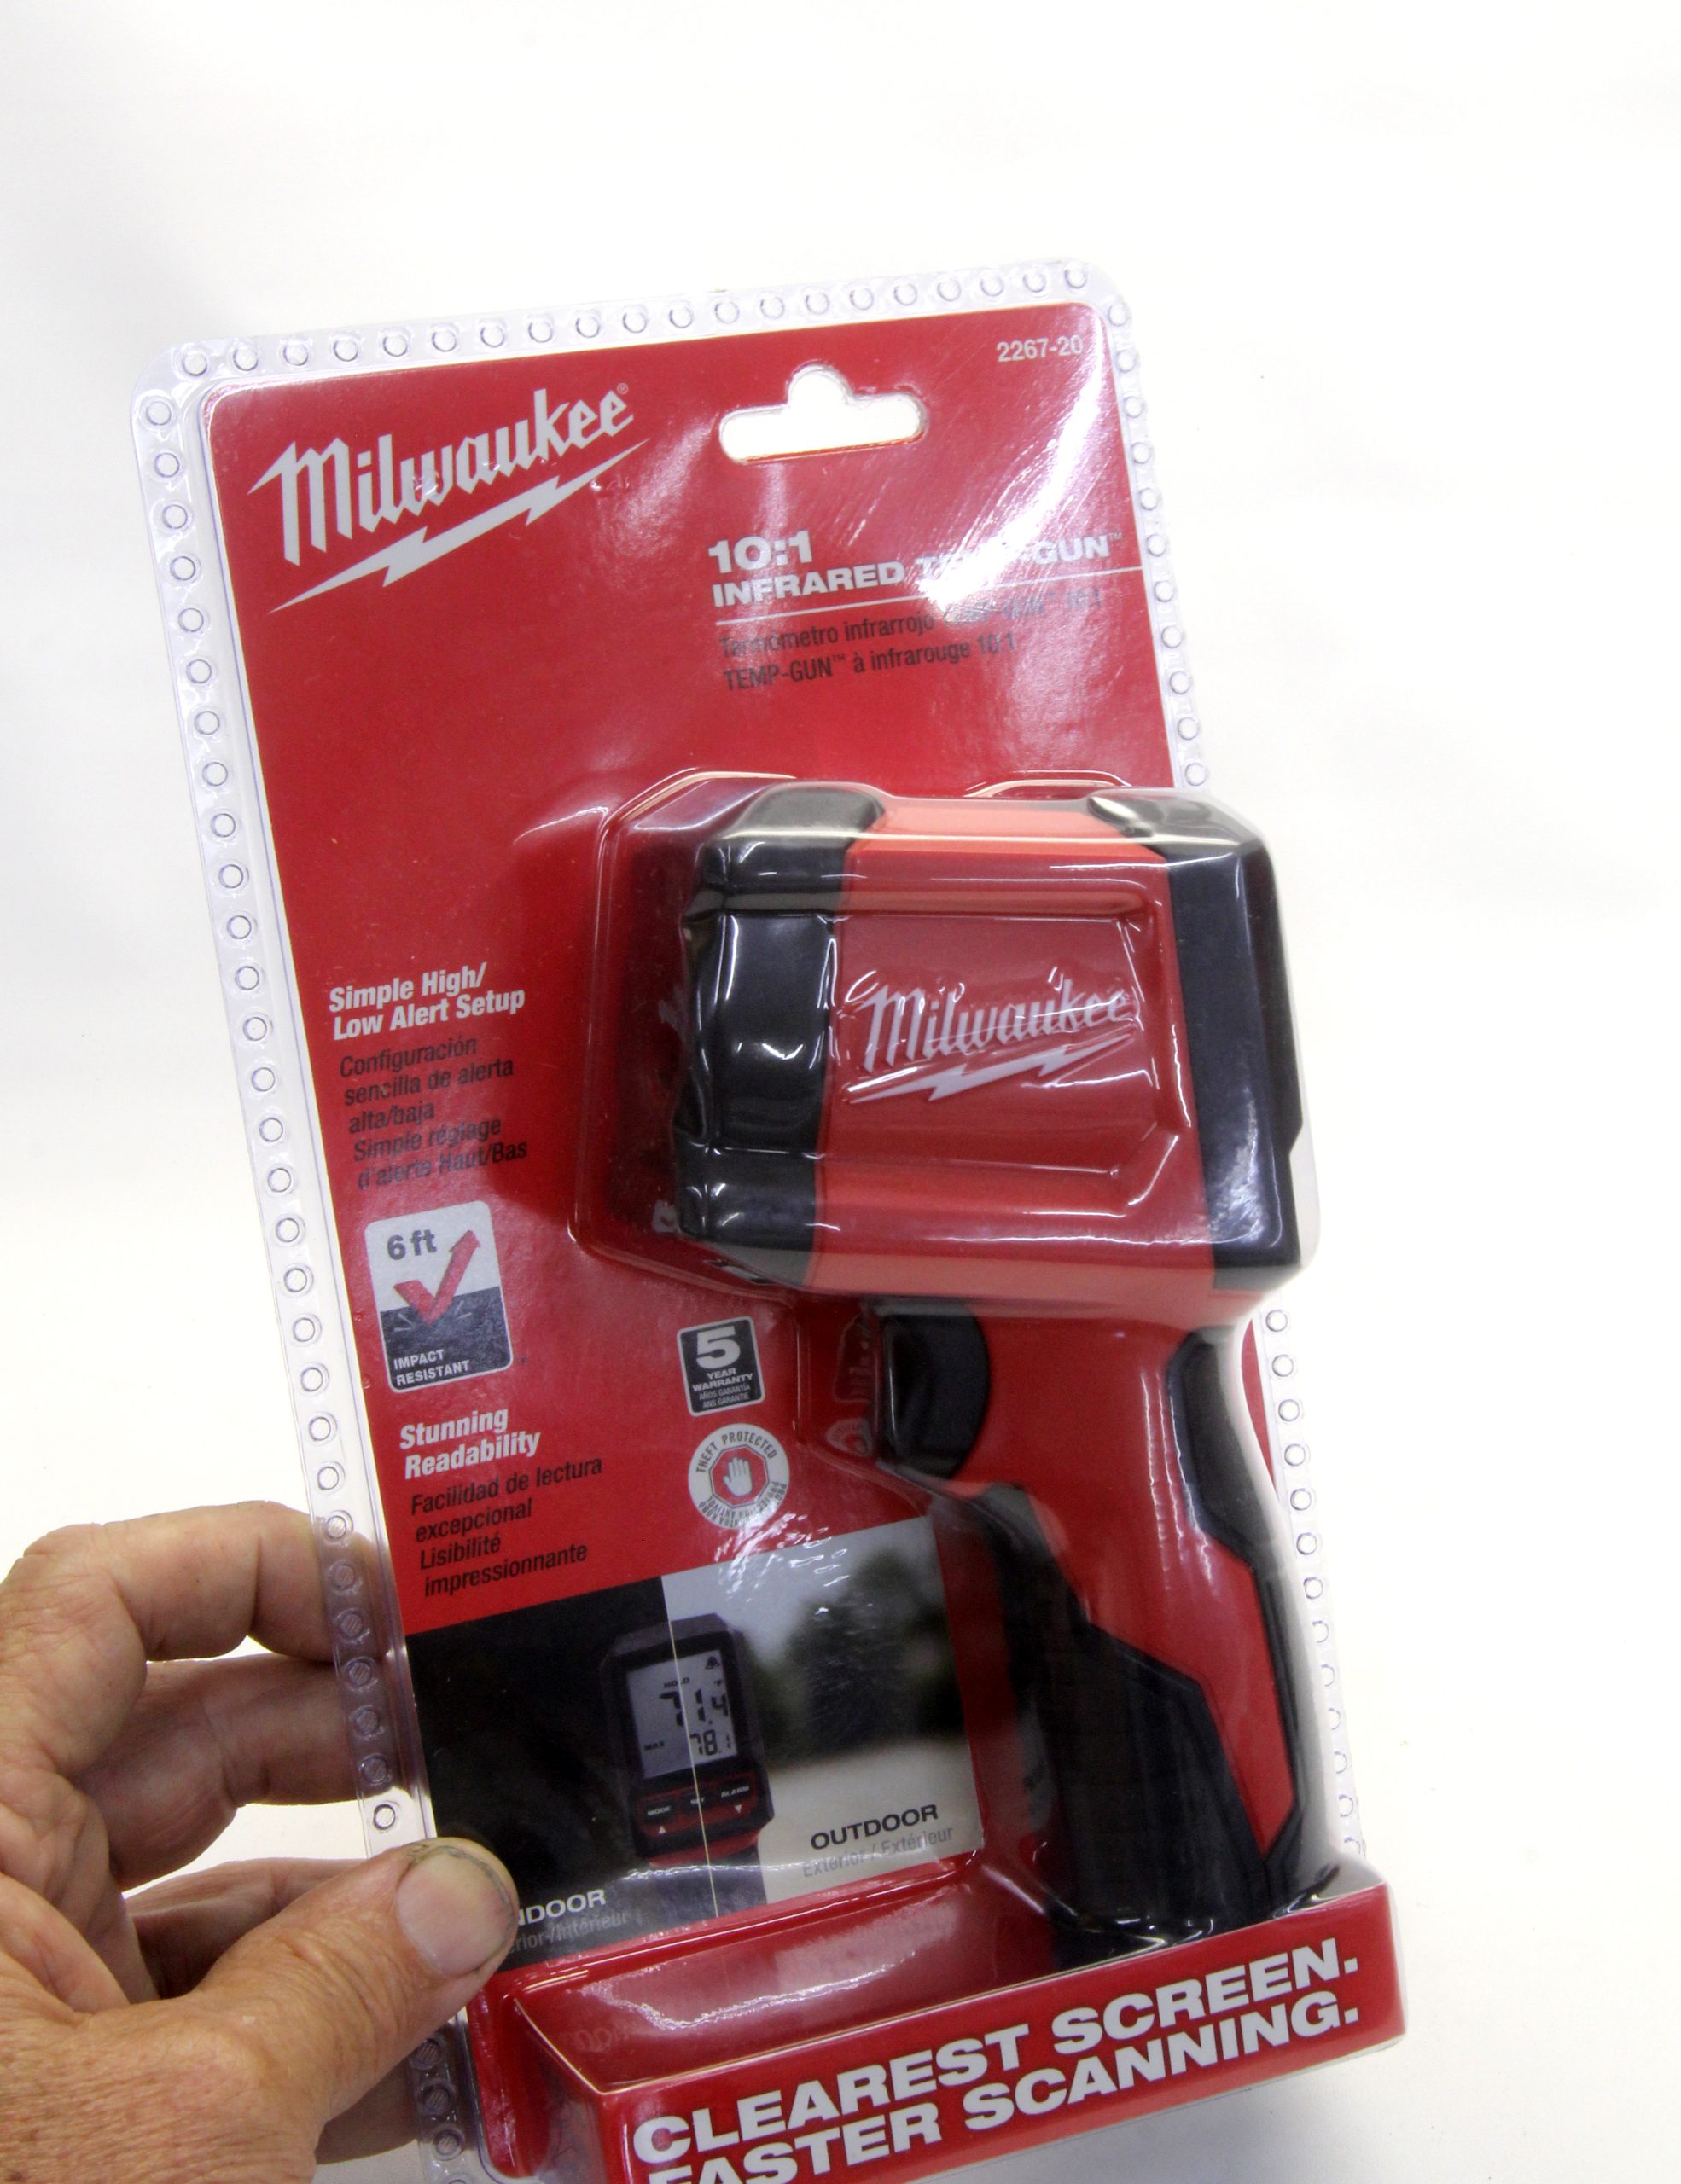 https://www.onallcylinders.com/wp-content/uploads/2022/09/21/milwaukee-tool-infrared-temp-gun-and-packaging-scaled.jpg